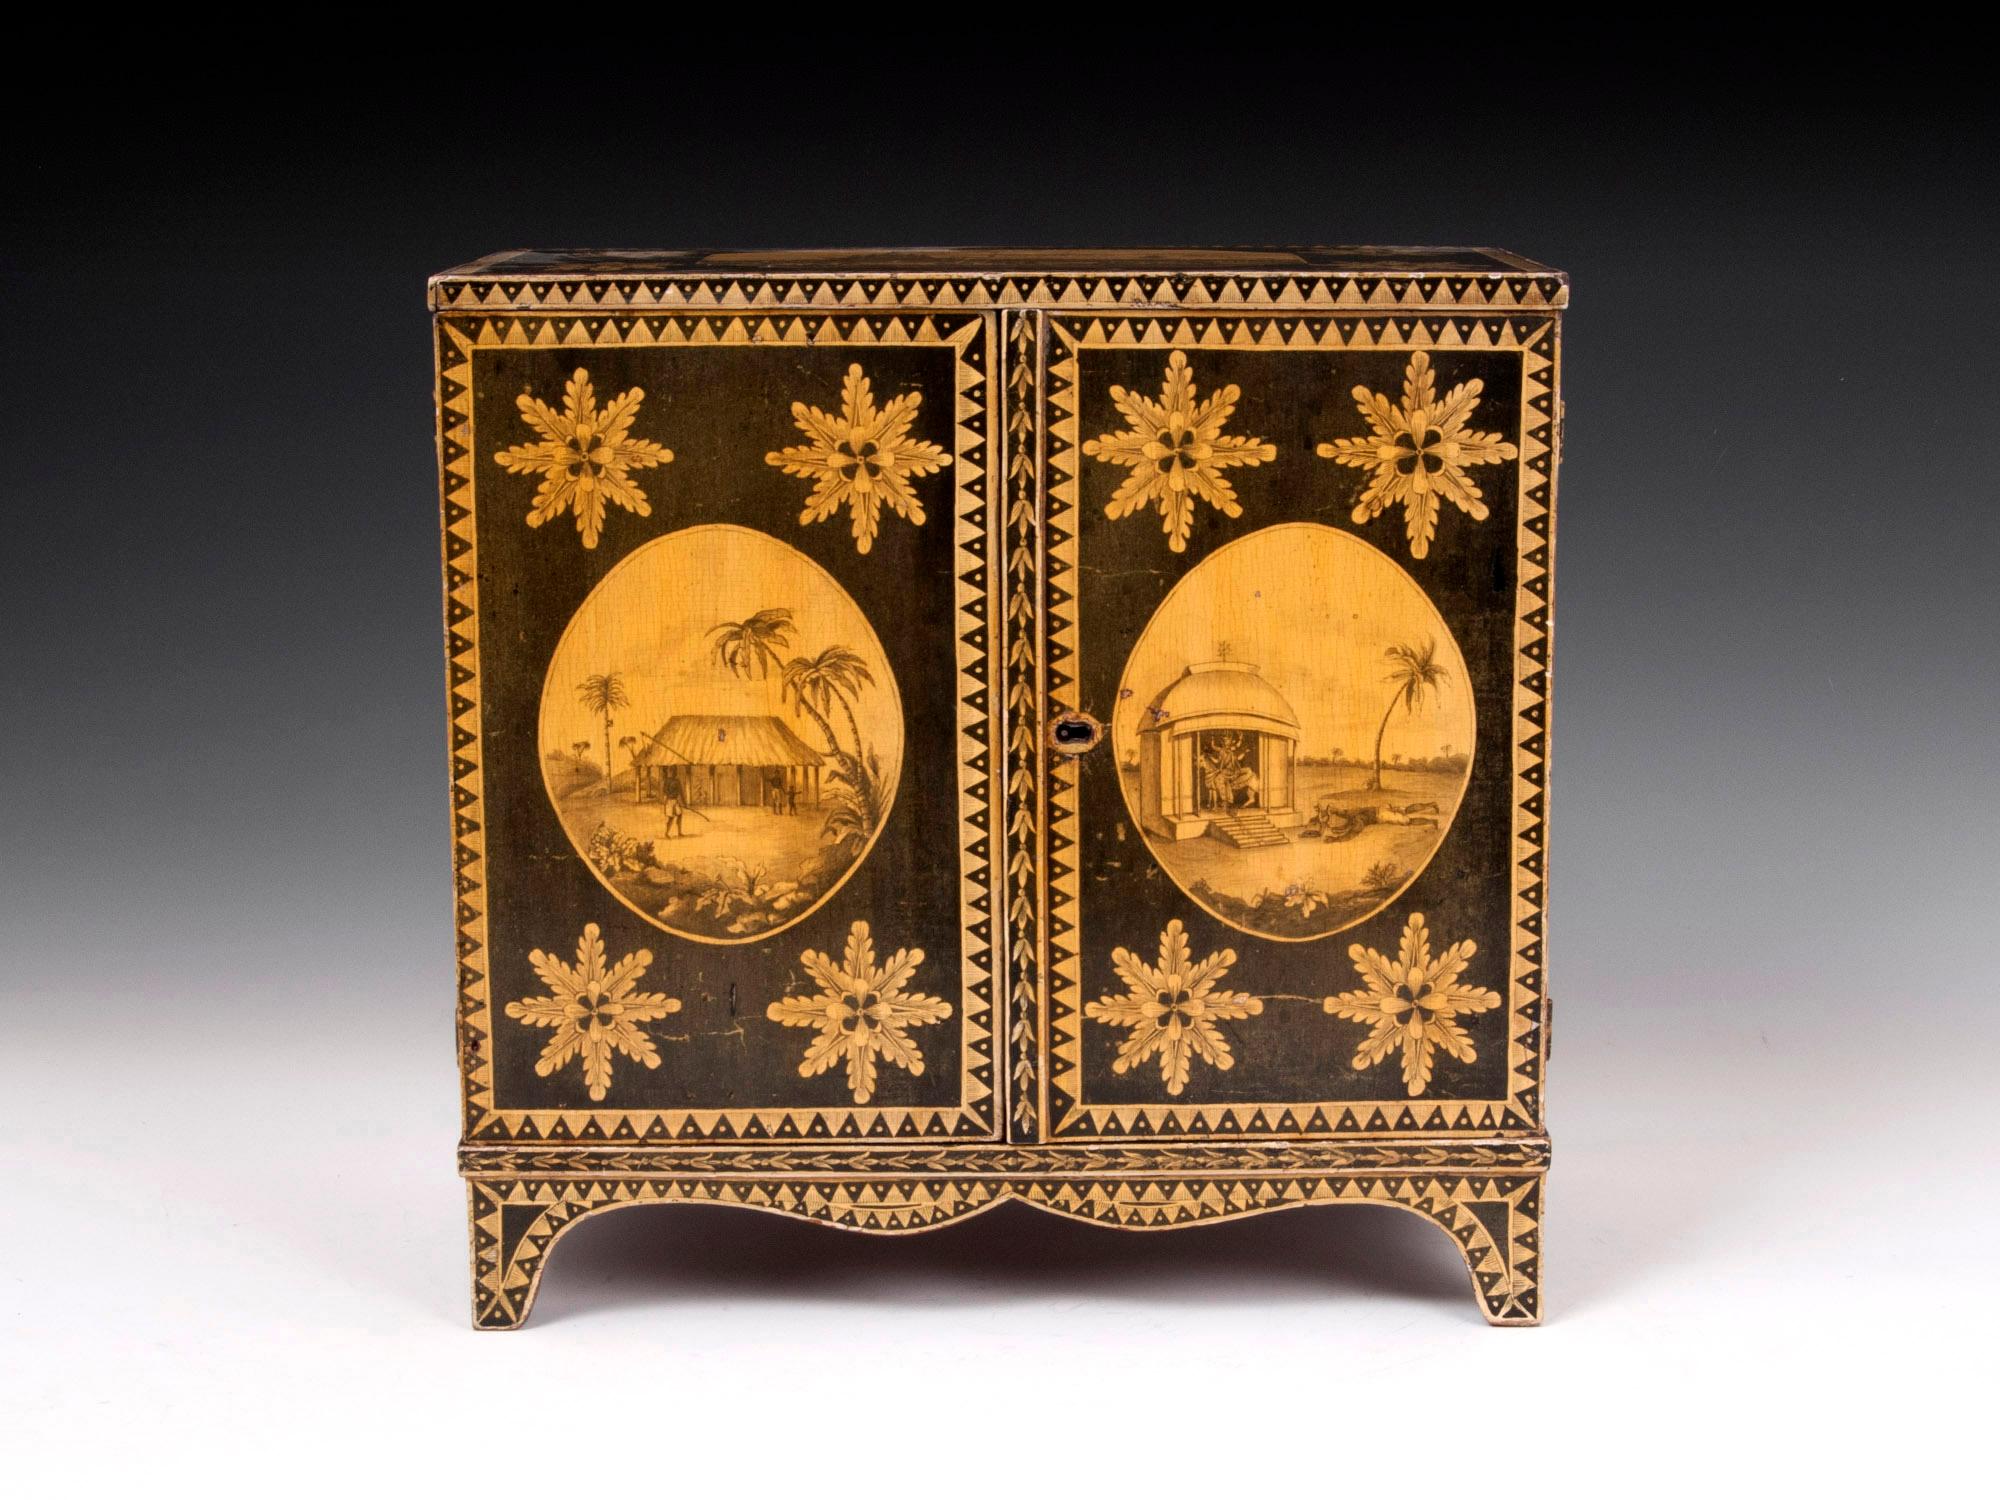 Extremely Rare Regency Antique Penwork Cabinet

A very interesting and rare Antique Regency Penwork Cabinet decorated with numerous scenes of exquisite detail. This unique piece of furniture showcases the exquisite craftsmanship of the Regency